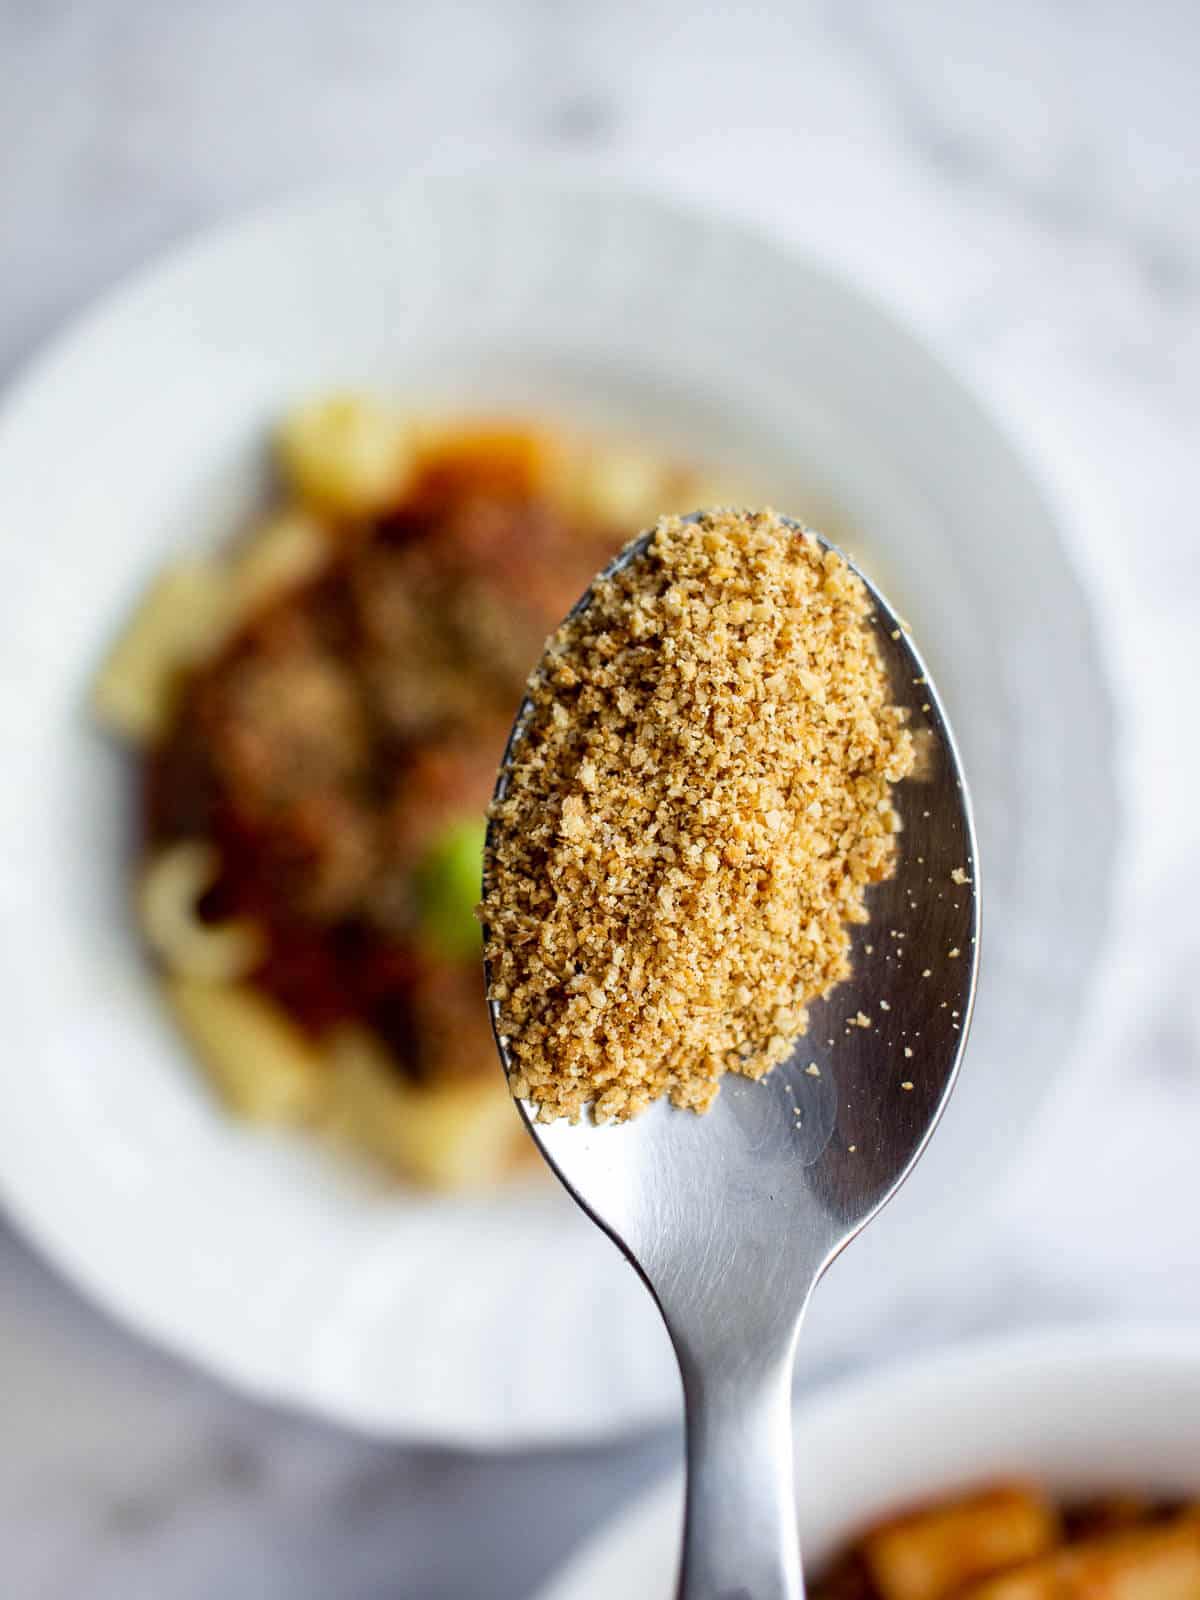 spoon with crumbly and textured vegan parmesan substitute.